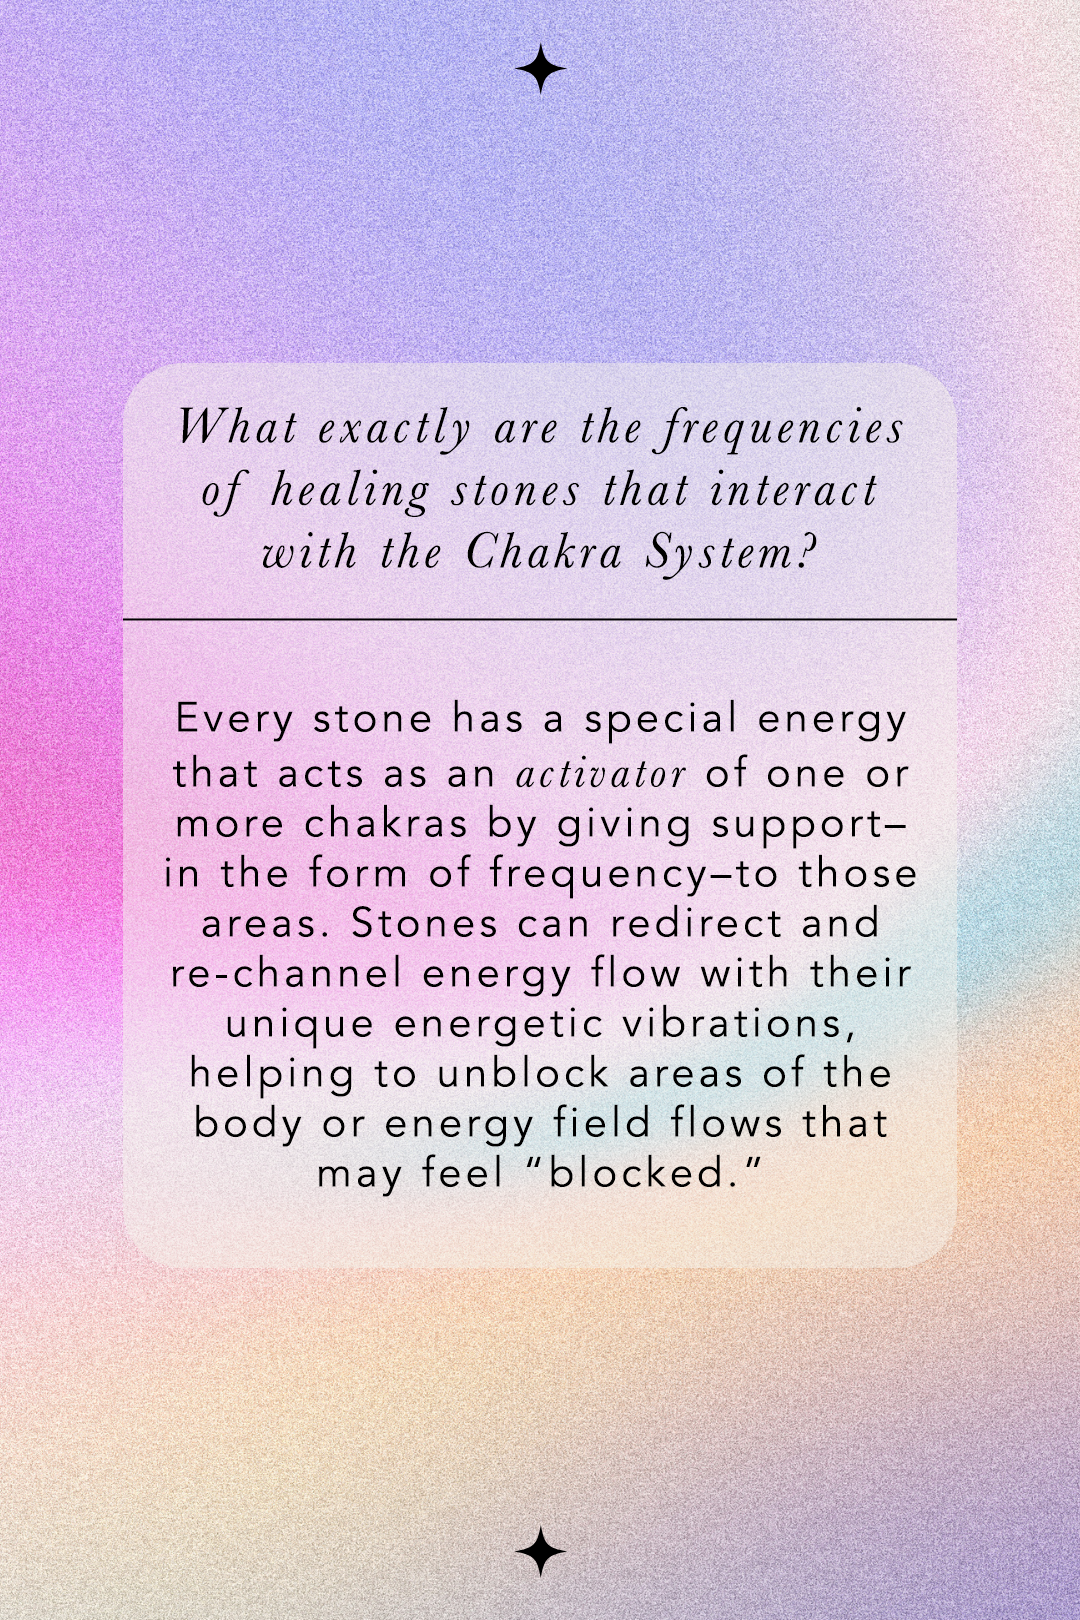 What exactly are the frequencies of healing stones that interact with the Chakra System? Every stone has a special energy that acts as an activator of one or more chakras by giving support - in the form of frequency - to those areas. Stones can redirect and re-channel energy flow with their vibrations, helping to unblock areas of the body or energy field flows that may feel "blocked."